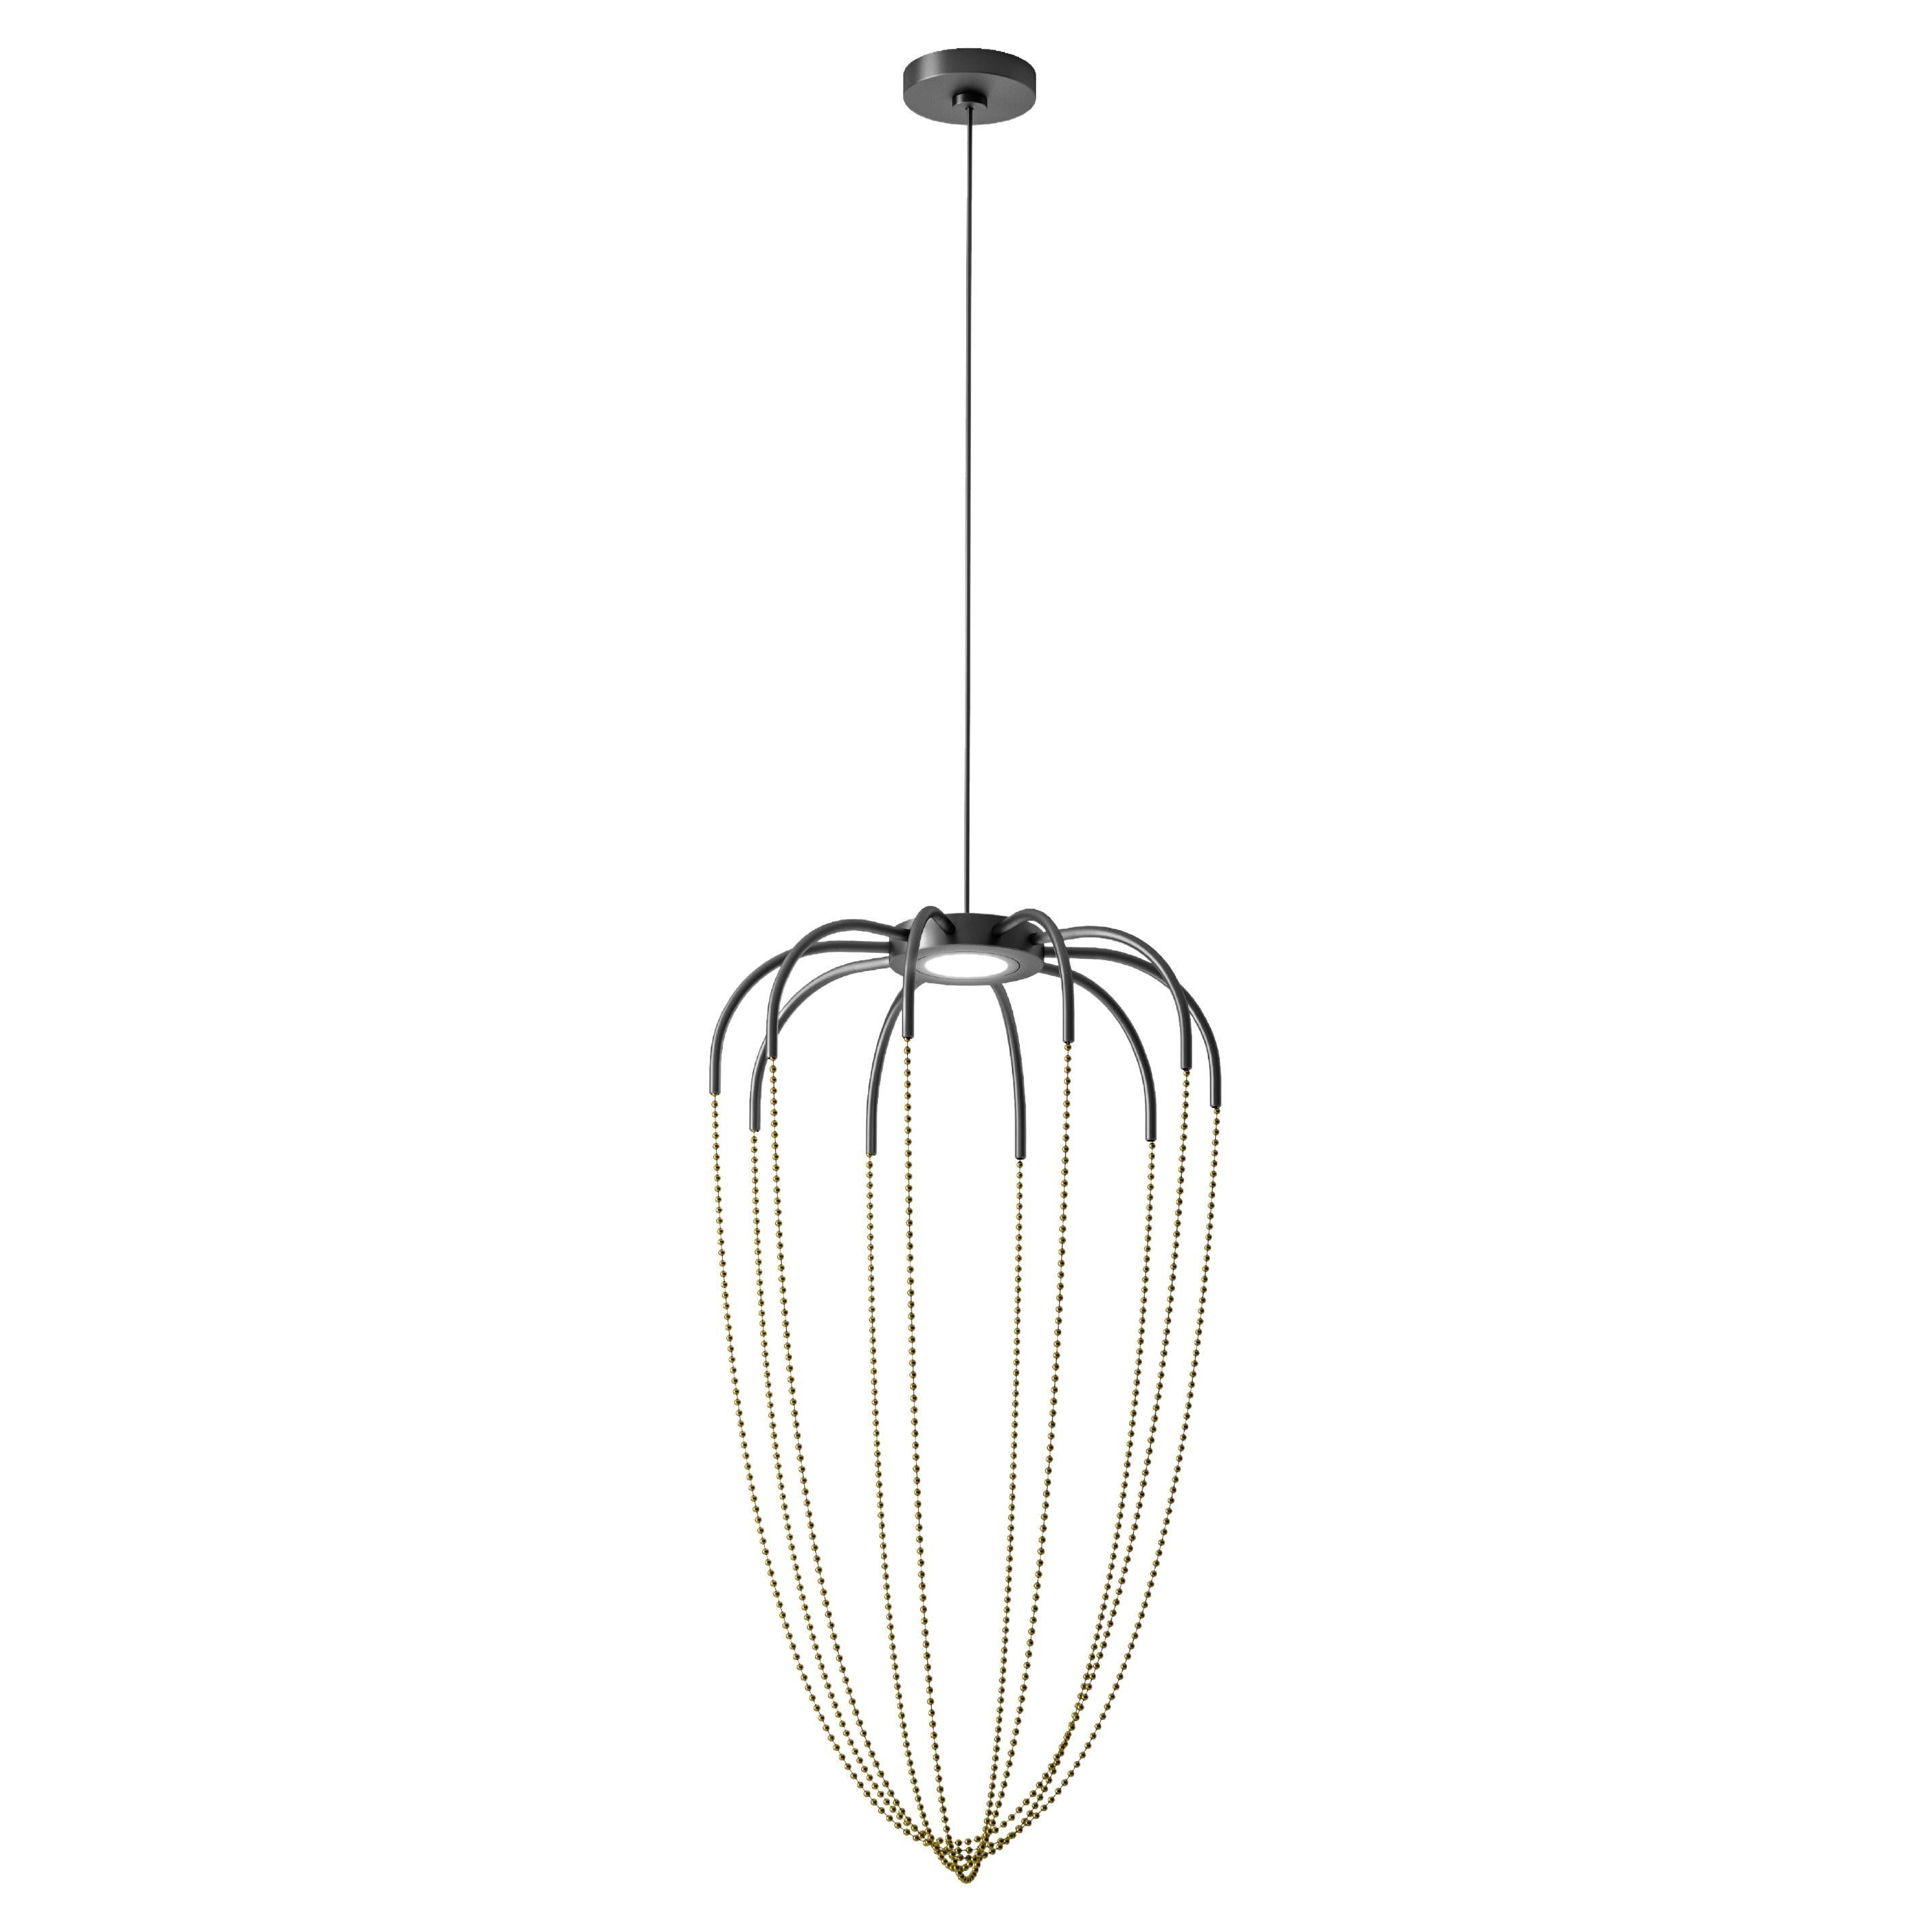 Axolight Alysoid Medium Pendant Lamp in Anthracite Grey with Brass Chains For Sale